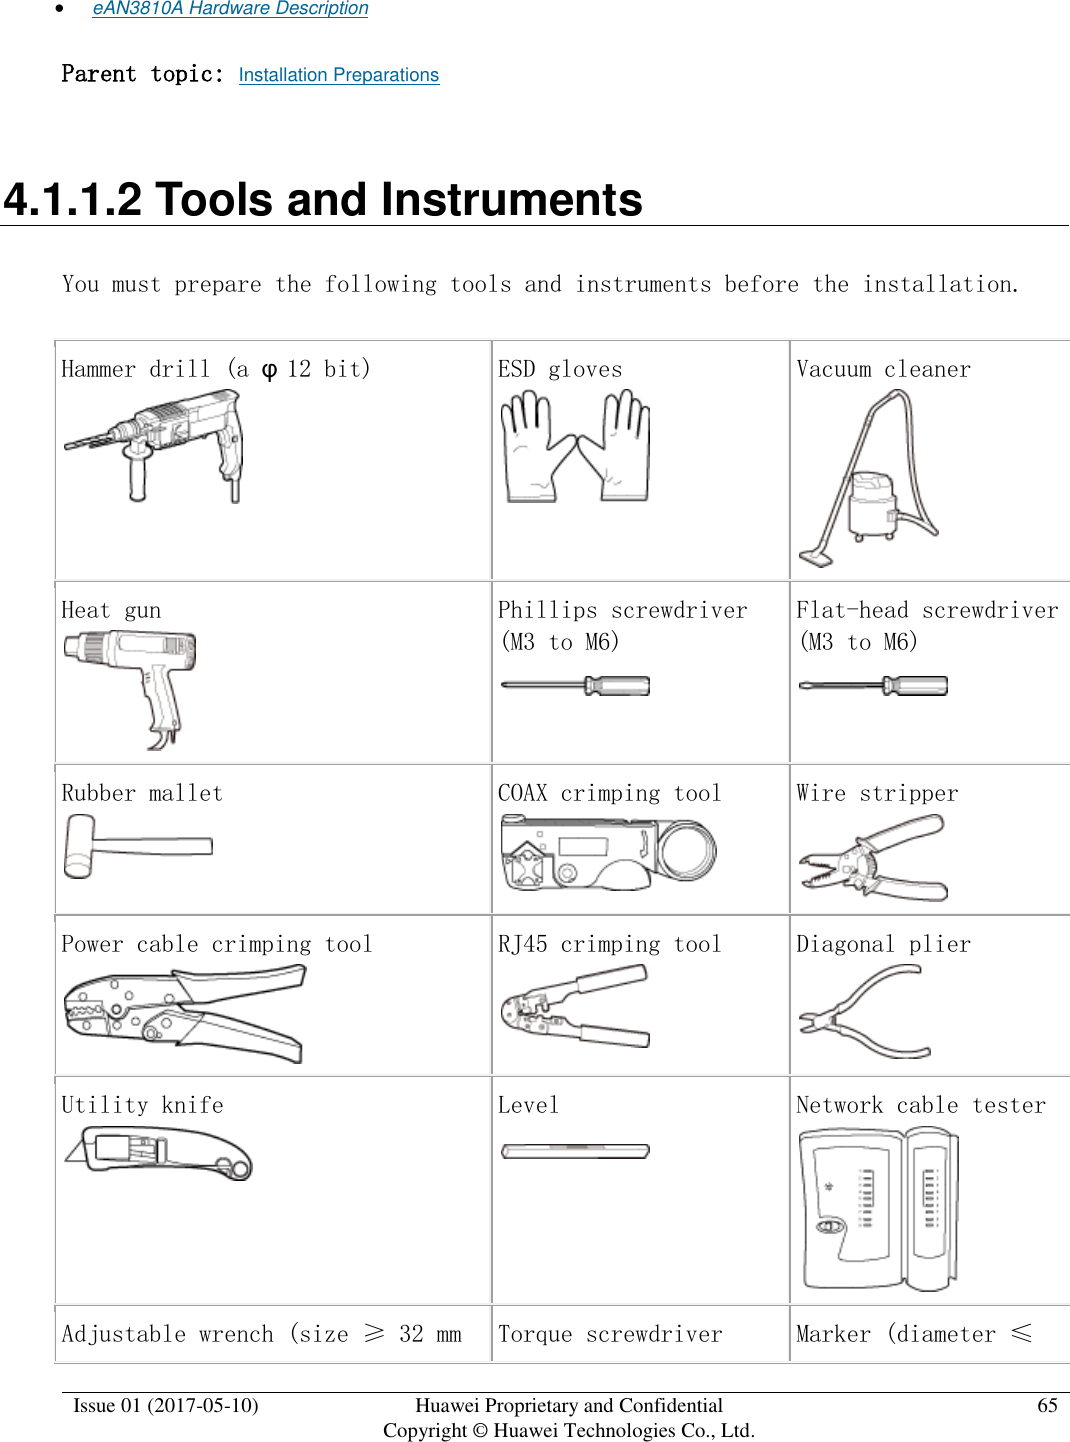  Issue 01 (2017-05-10) Huawei Proprietary and Confidential      Copyright © Huawei Technologies Co., Ltd. 65   eAN3810A Hardware Description Parent topic: Installation Preparations 4.1.1.2 Tools and Instruments You must prepare the following tools and instruments before the installation. Hammer drill (a φ12 bit)   ESD gloves  Vacuum cleaner  Heat gun  Phillips screwdriver (M3 to M6)  Flat-head screwdriver (M3 to M6)  Rubber mallet  COAX crimping tool  Wire stripper  Power cable crimping tool  RJ45 crimping tool  Diagonal plier  Utility knife  Level  Network cable tester  Adjustable wrench (size ≥ 32 mm Torque screwdriver Marker (diameter ≤ 